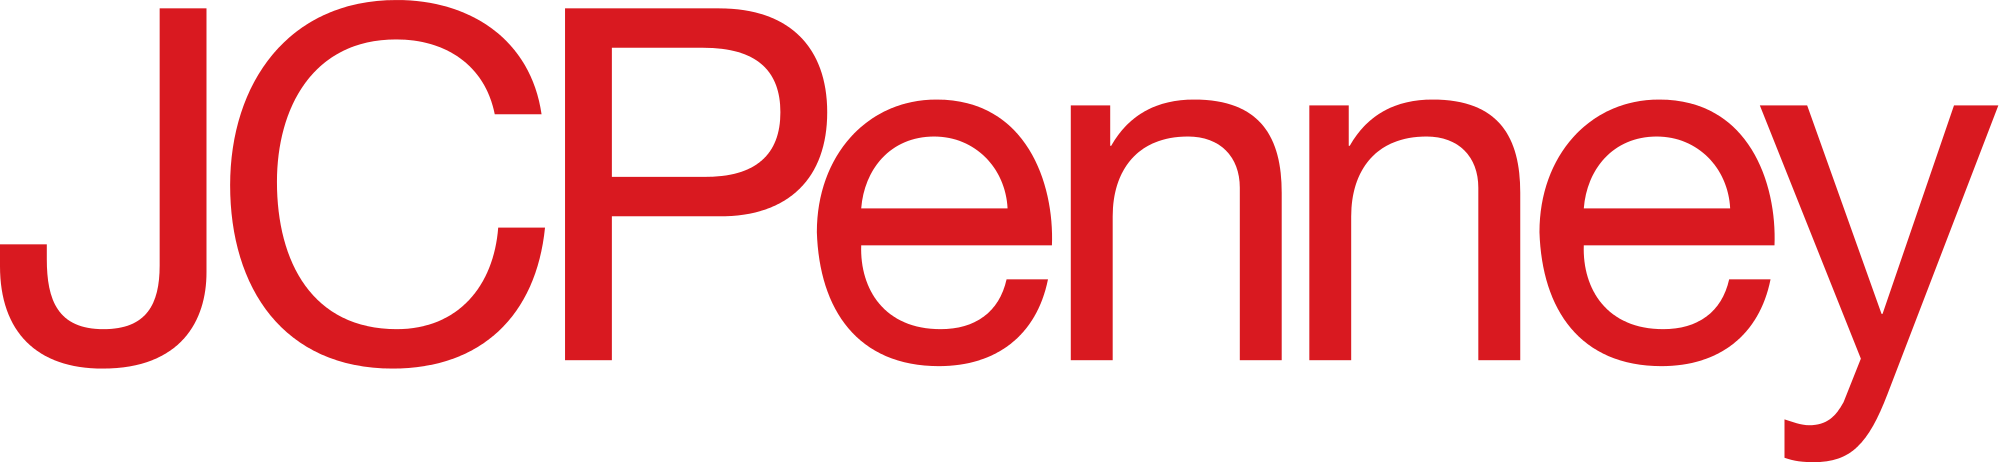 JC Penny.png